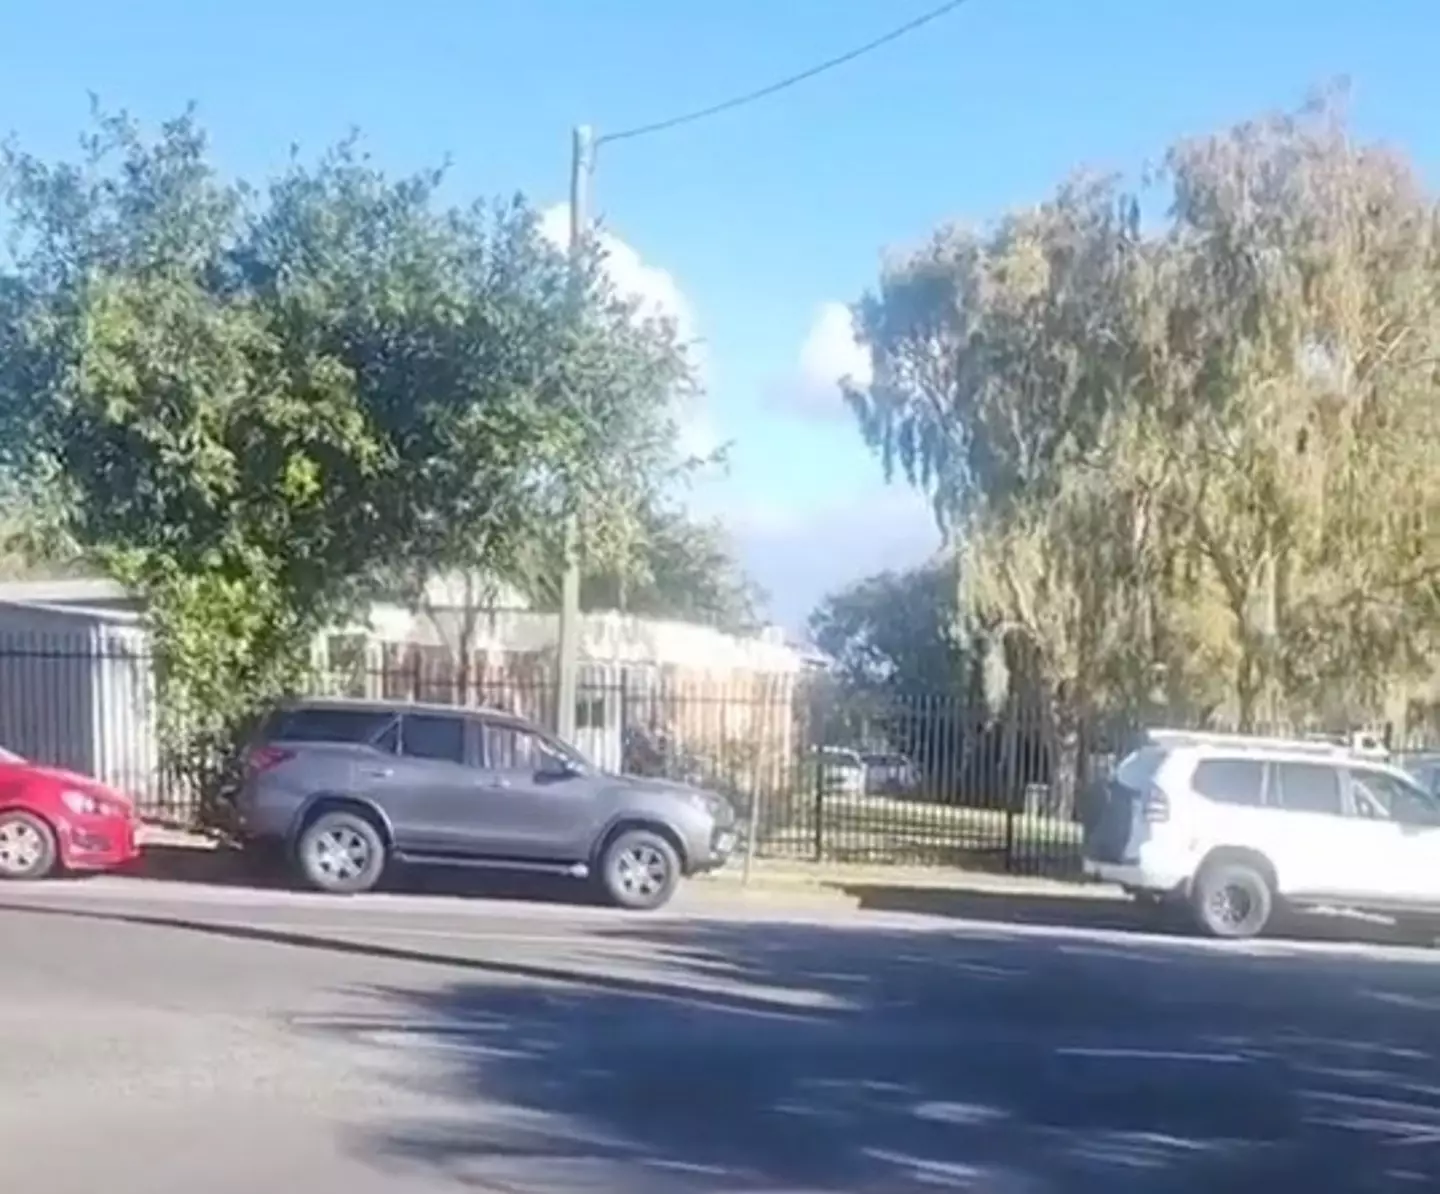 A mum in Australia has gone viral on TikTok after questioning an annoying school pick up habit.